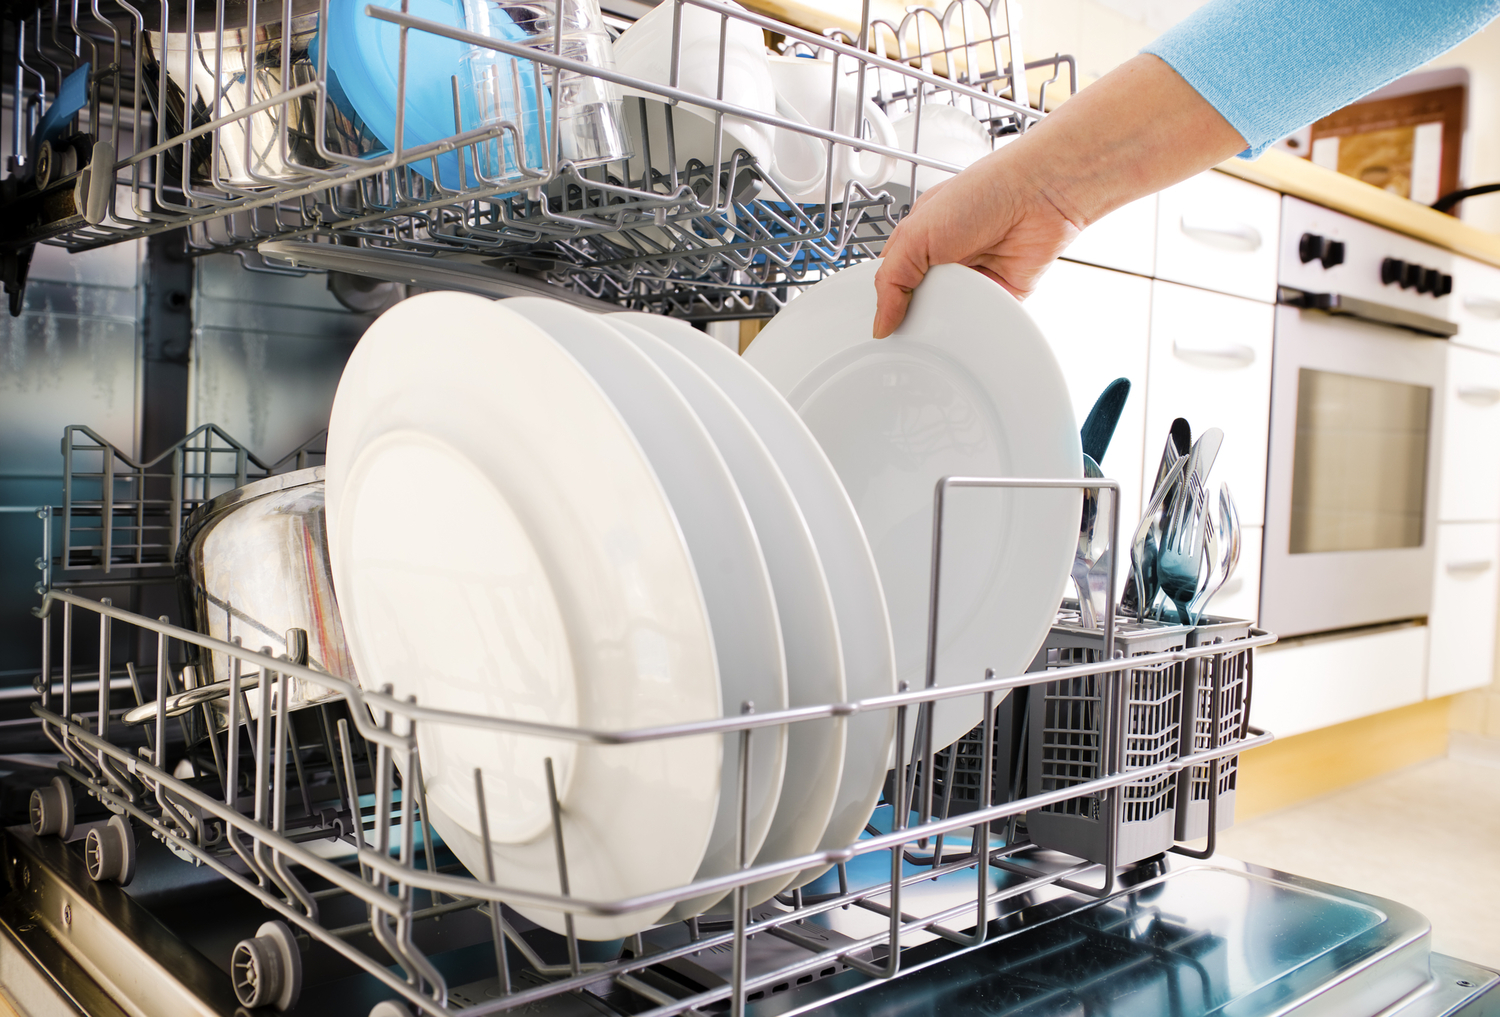 Where Should You Place Your Dishwasher Pods?